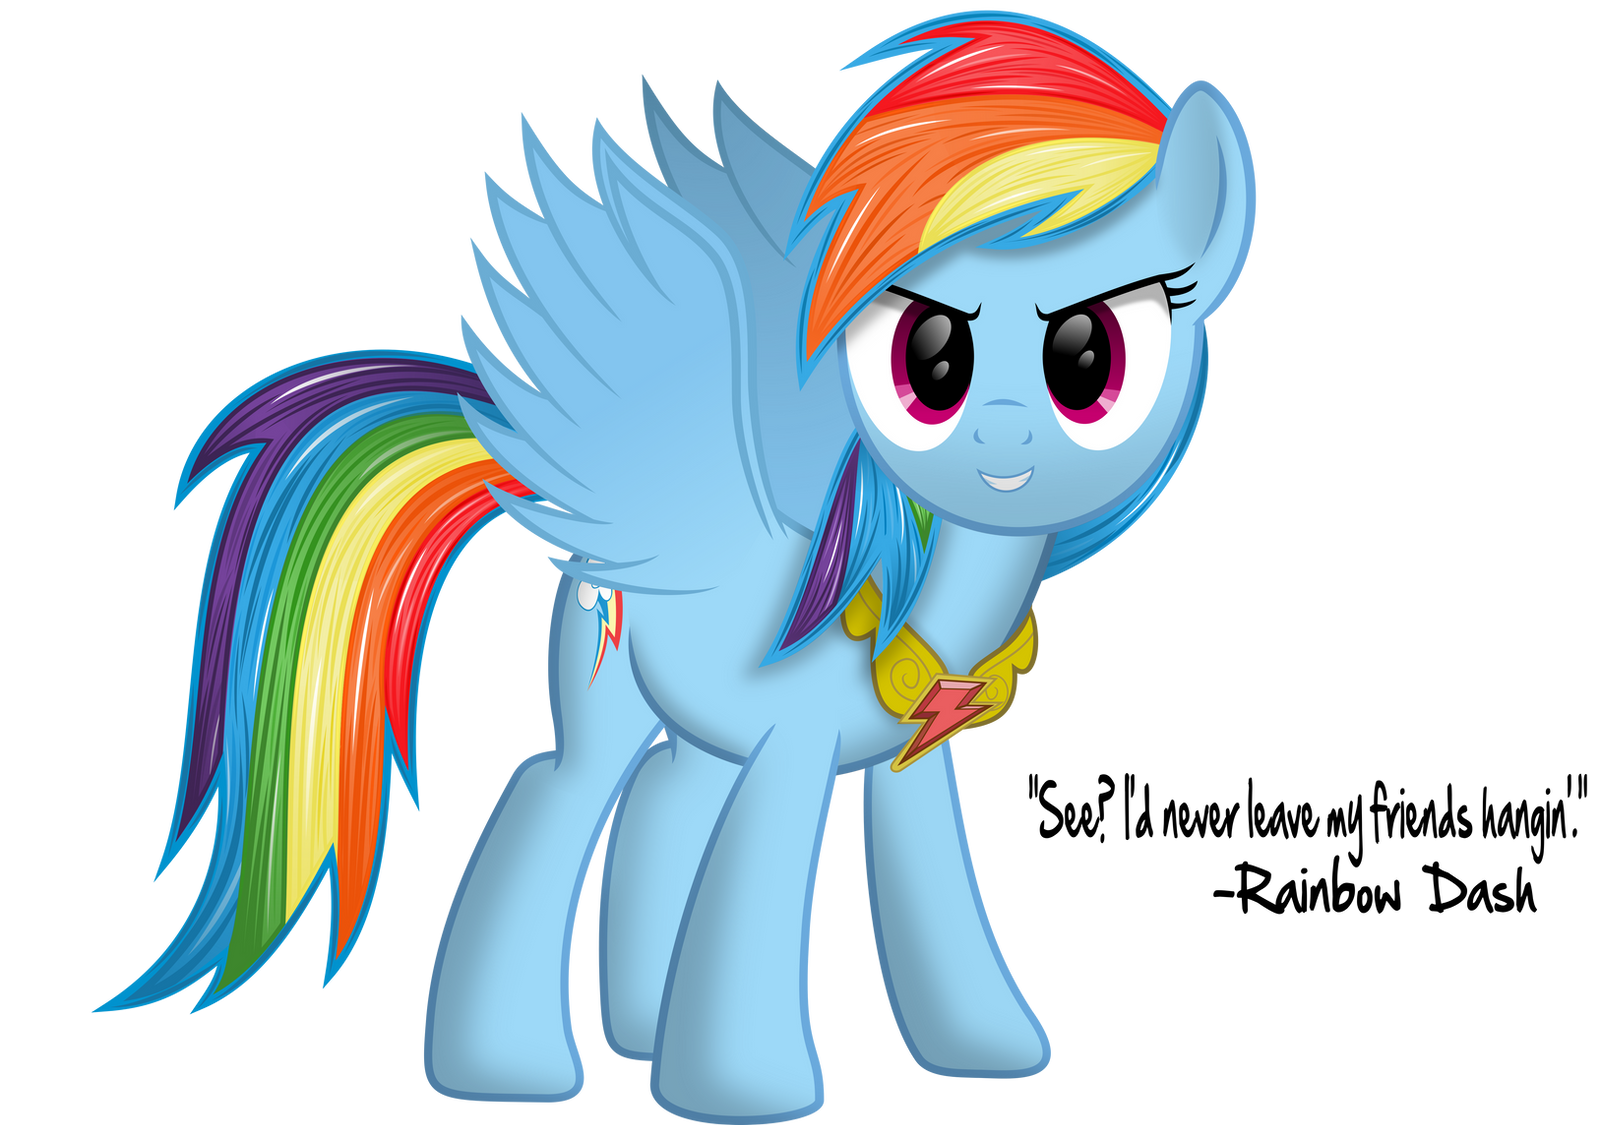 Rainbow Dash the most awesome Pony 639 Awesome Fans!